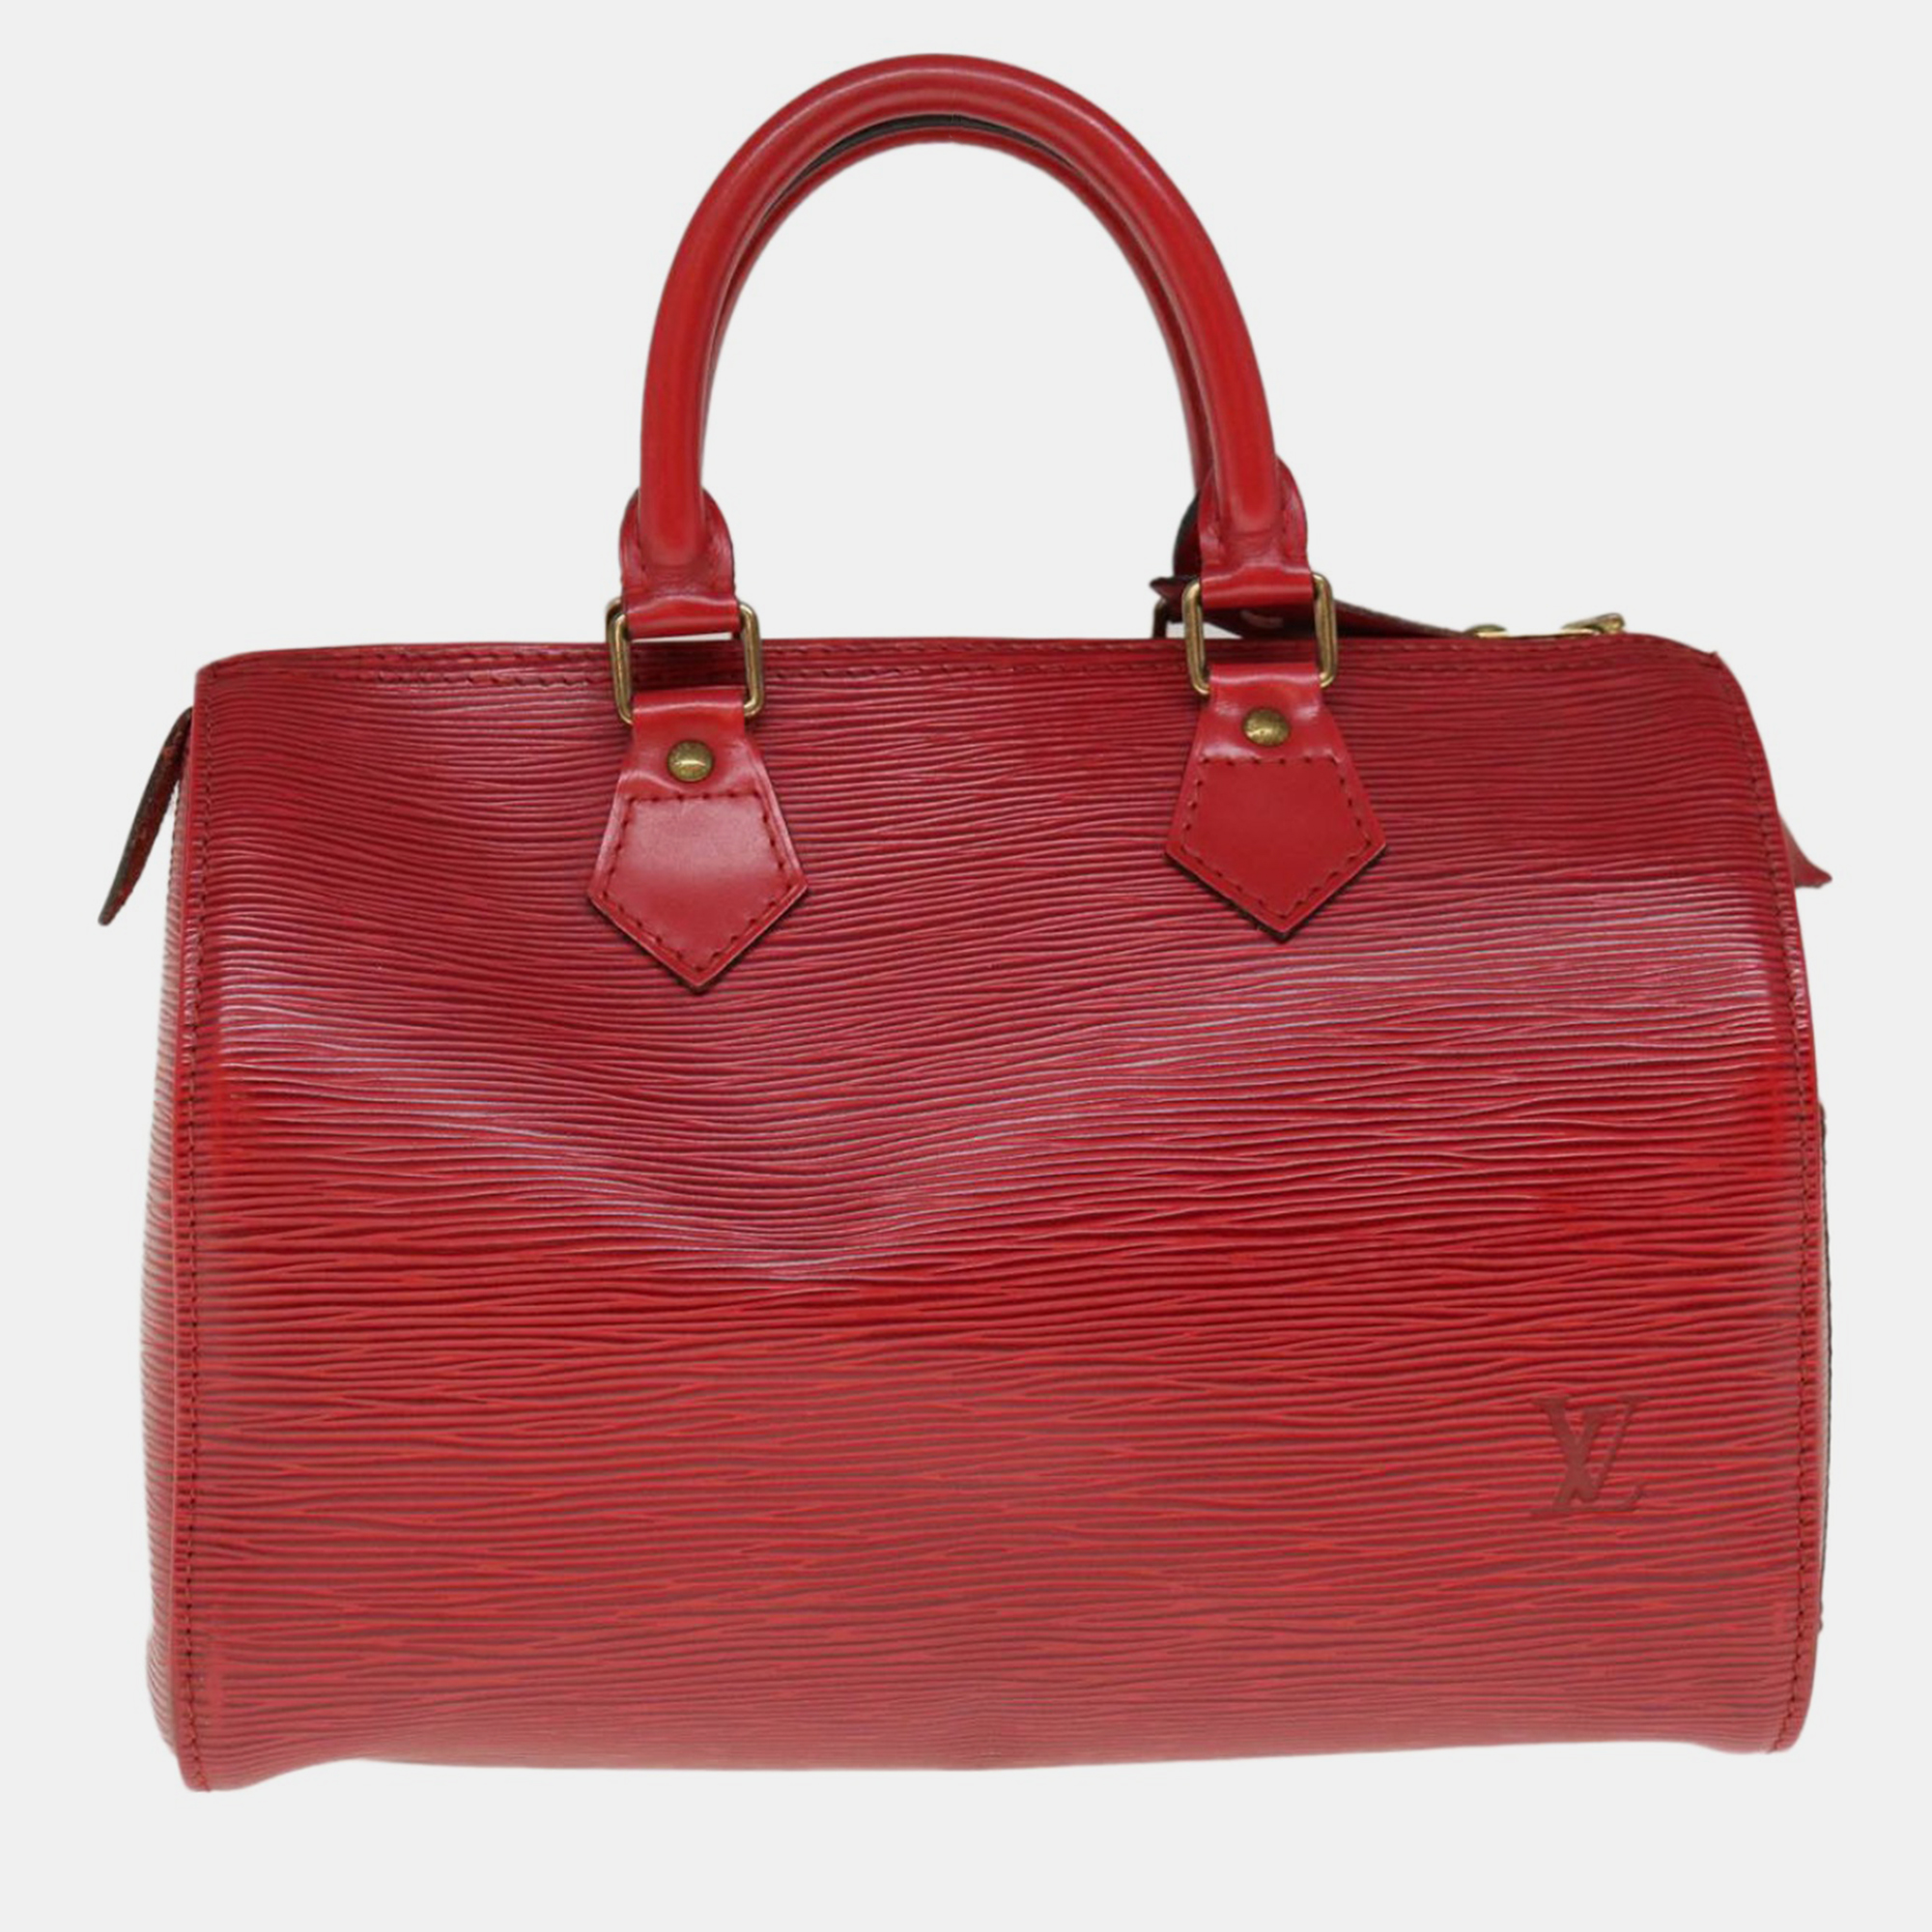 Louis vuitton red epi leather speedy 25 top handle bag